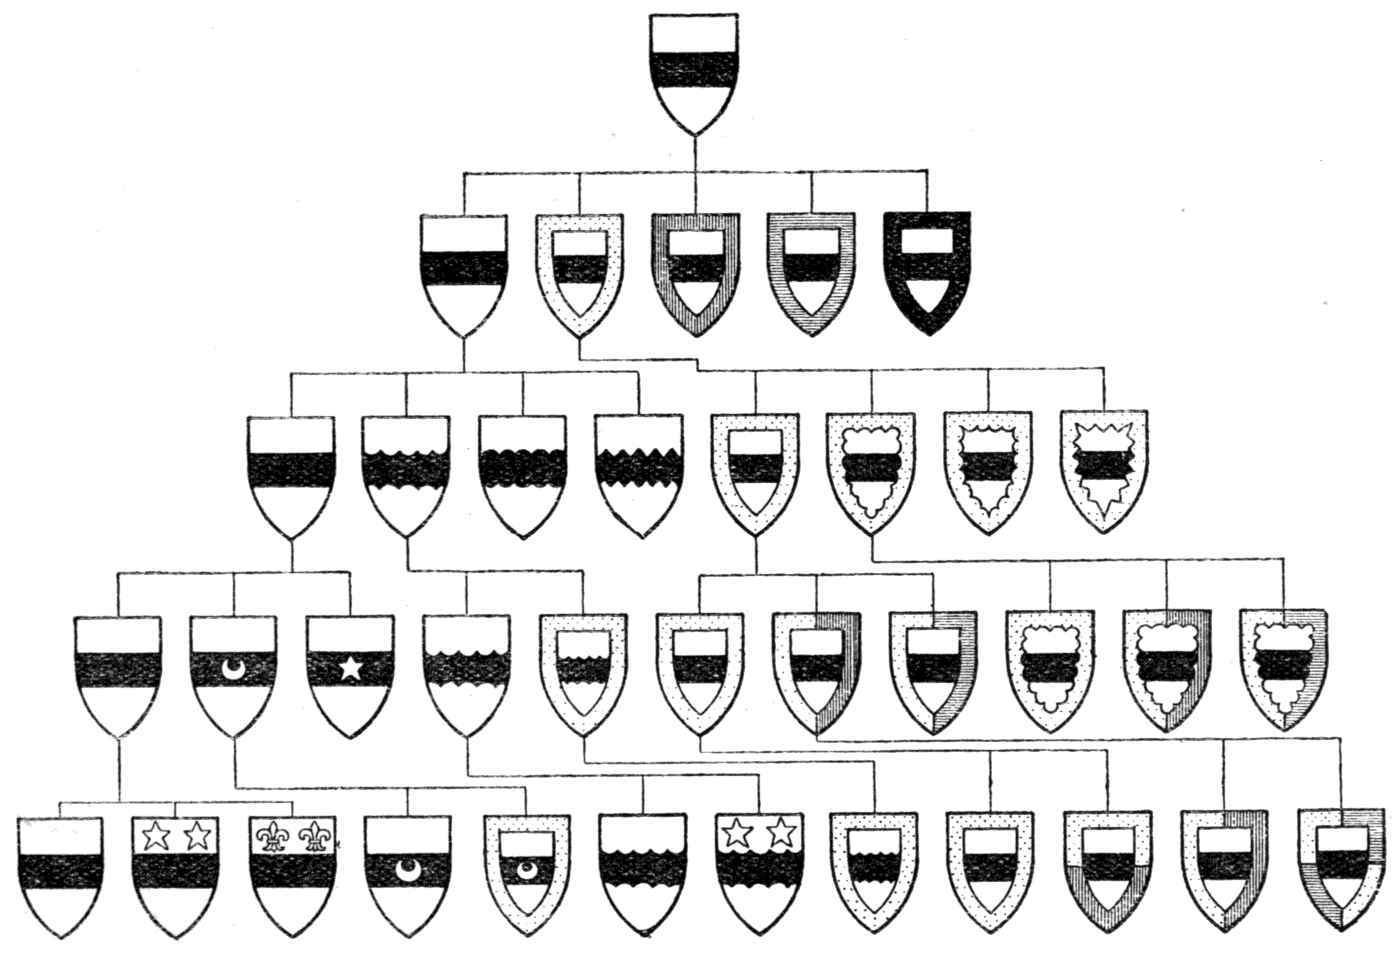 A complete guide to heraldry - tree view of heraldic symbols